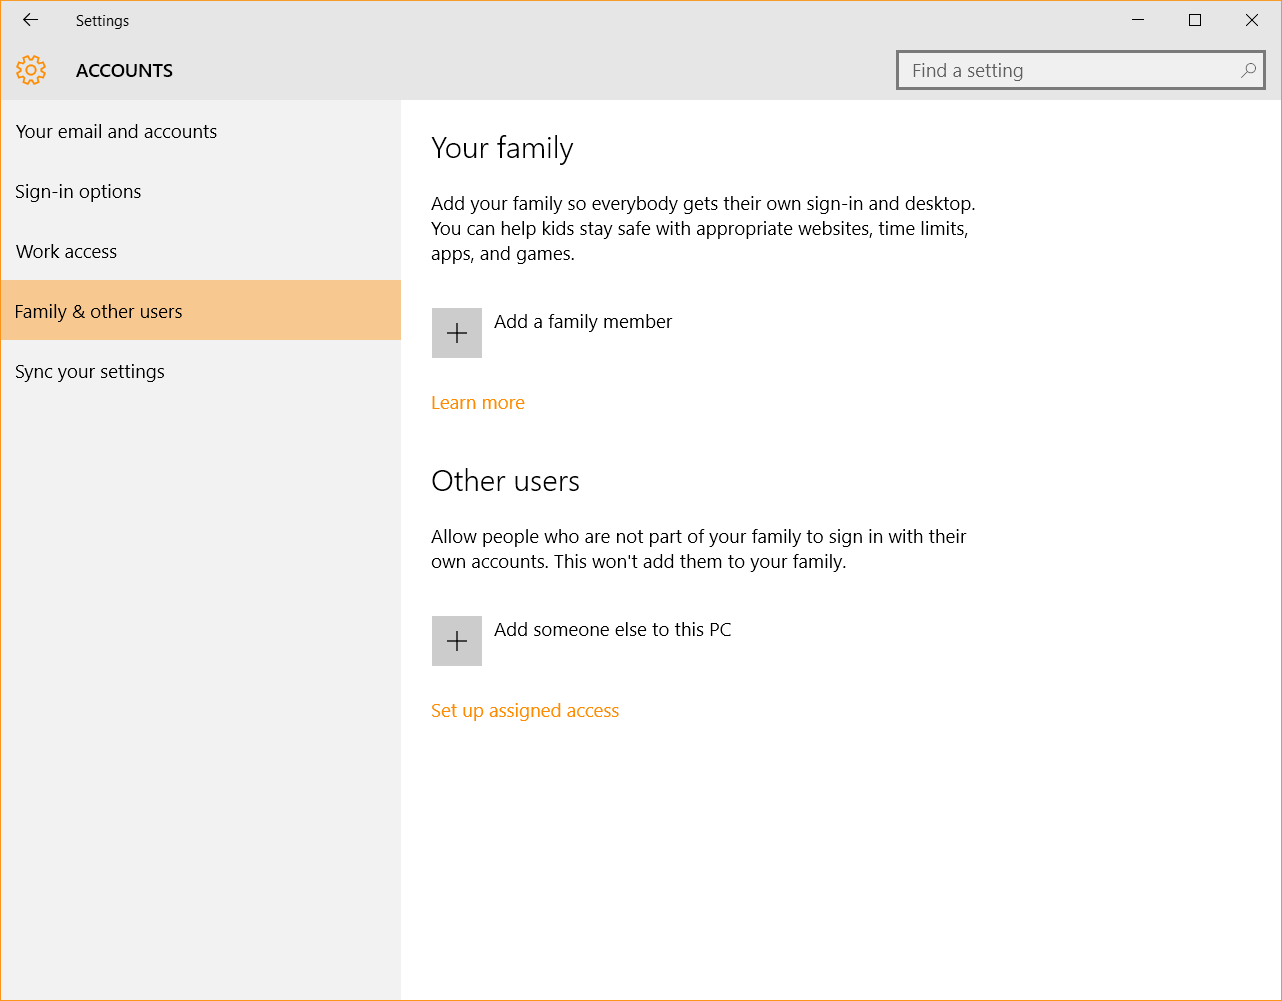 Windows 10 Security Guide - Family and Other Users Access Microsoft Account